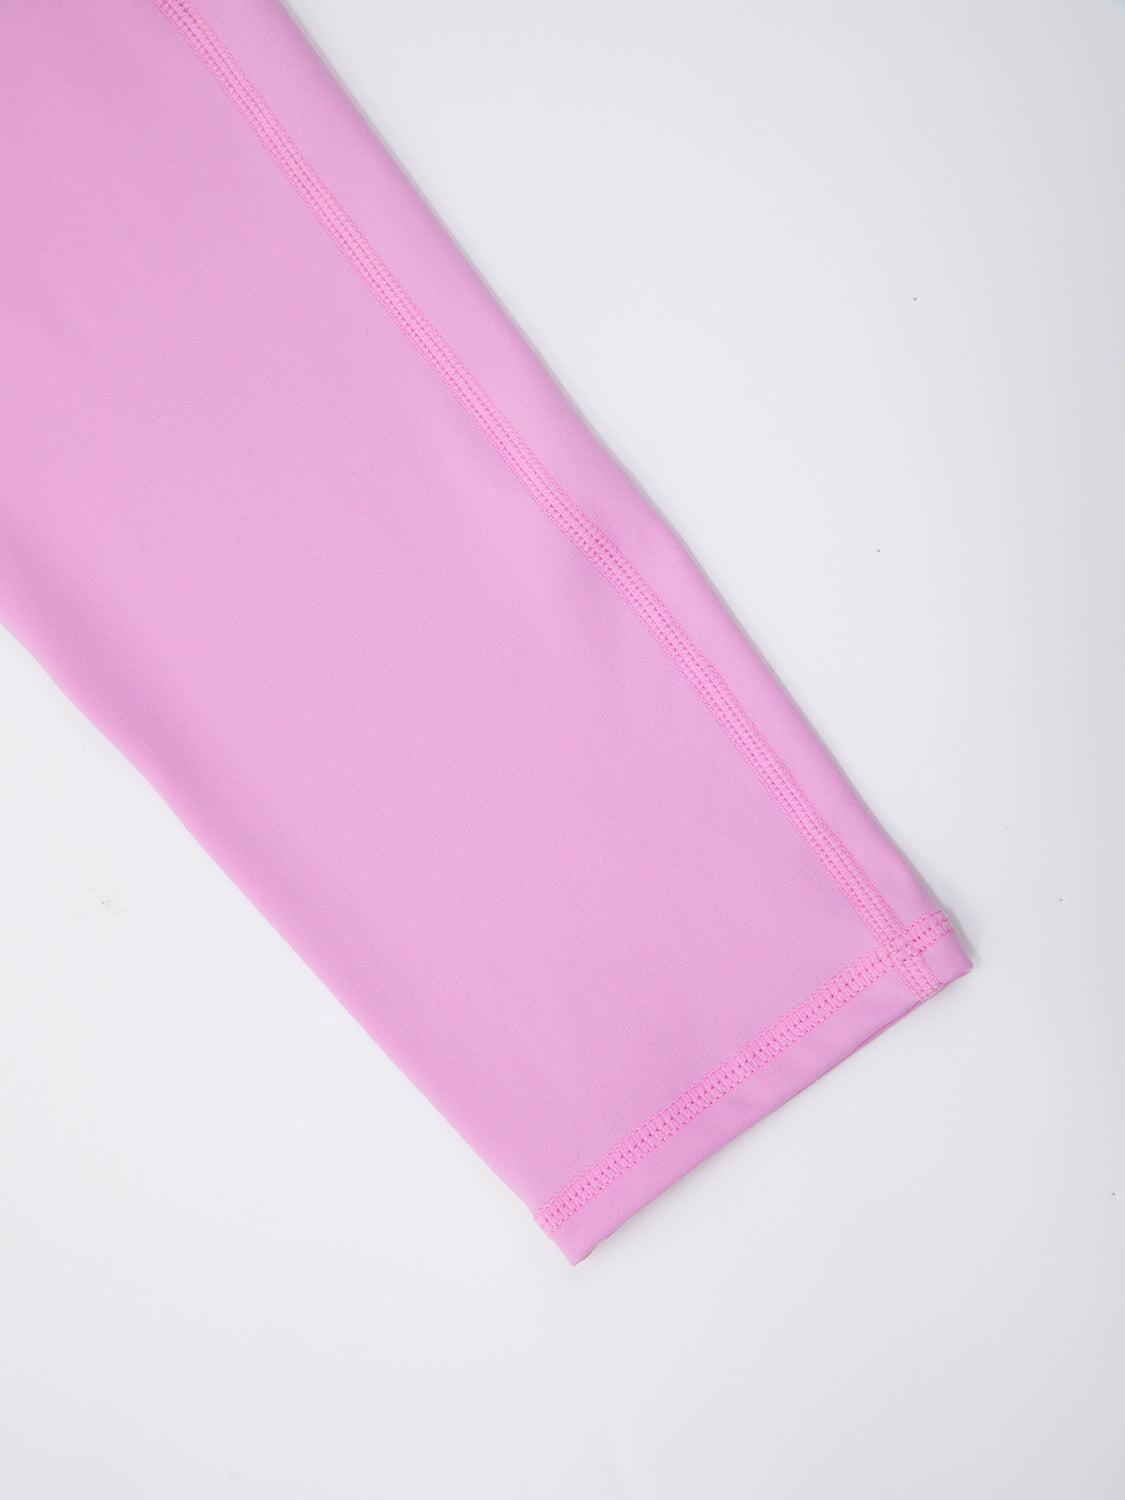 a close up of a pink cloth on a white surface